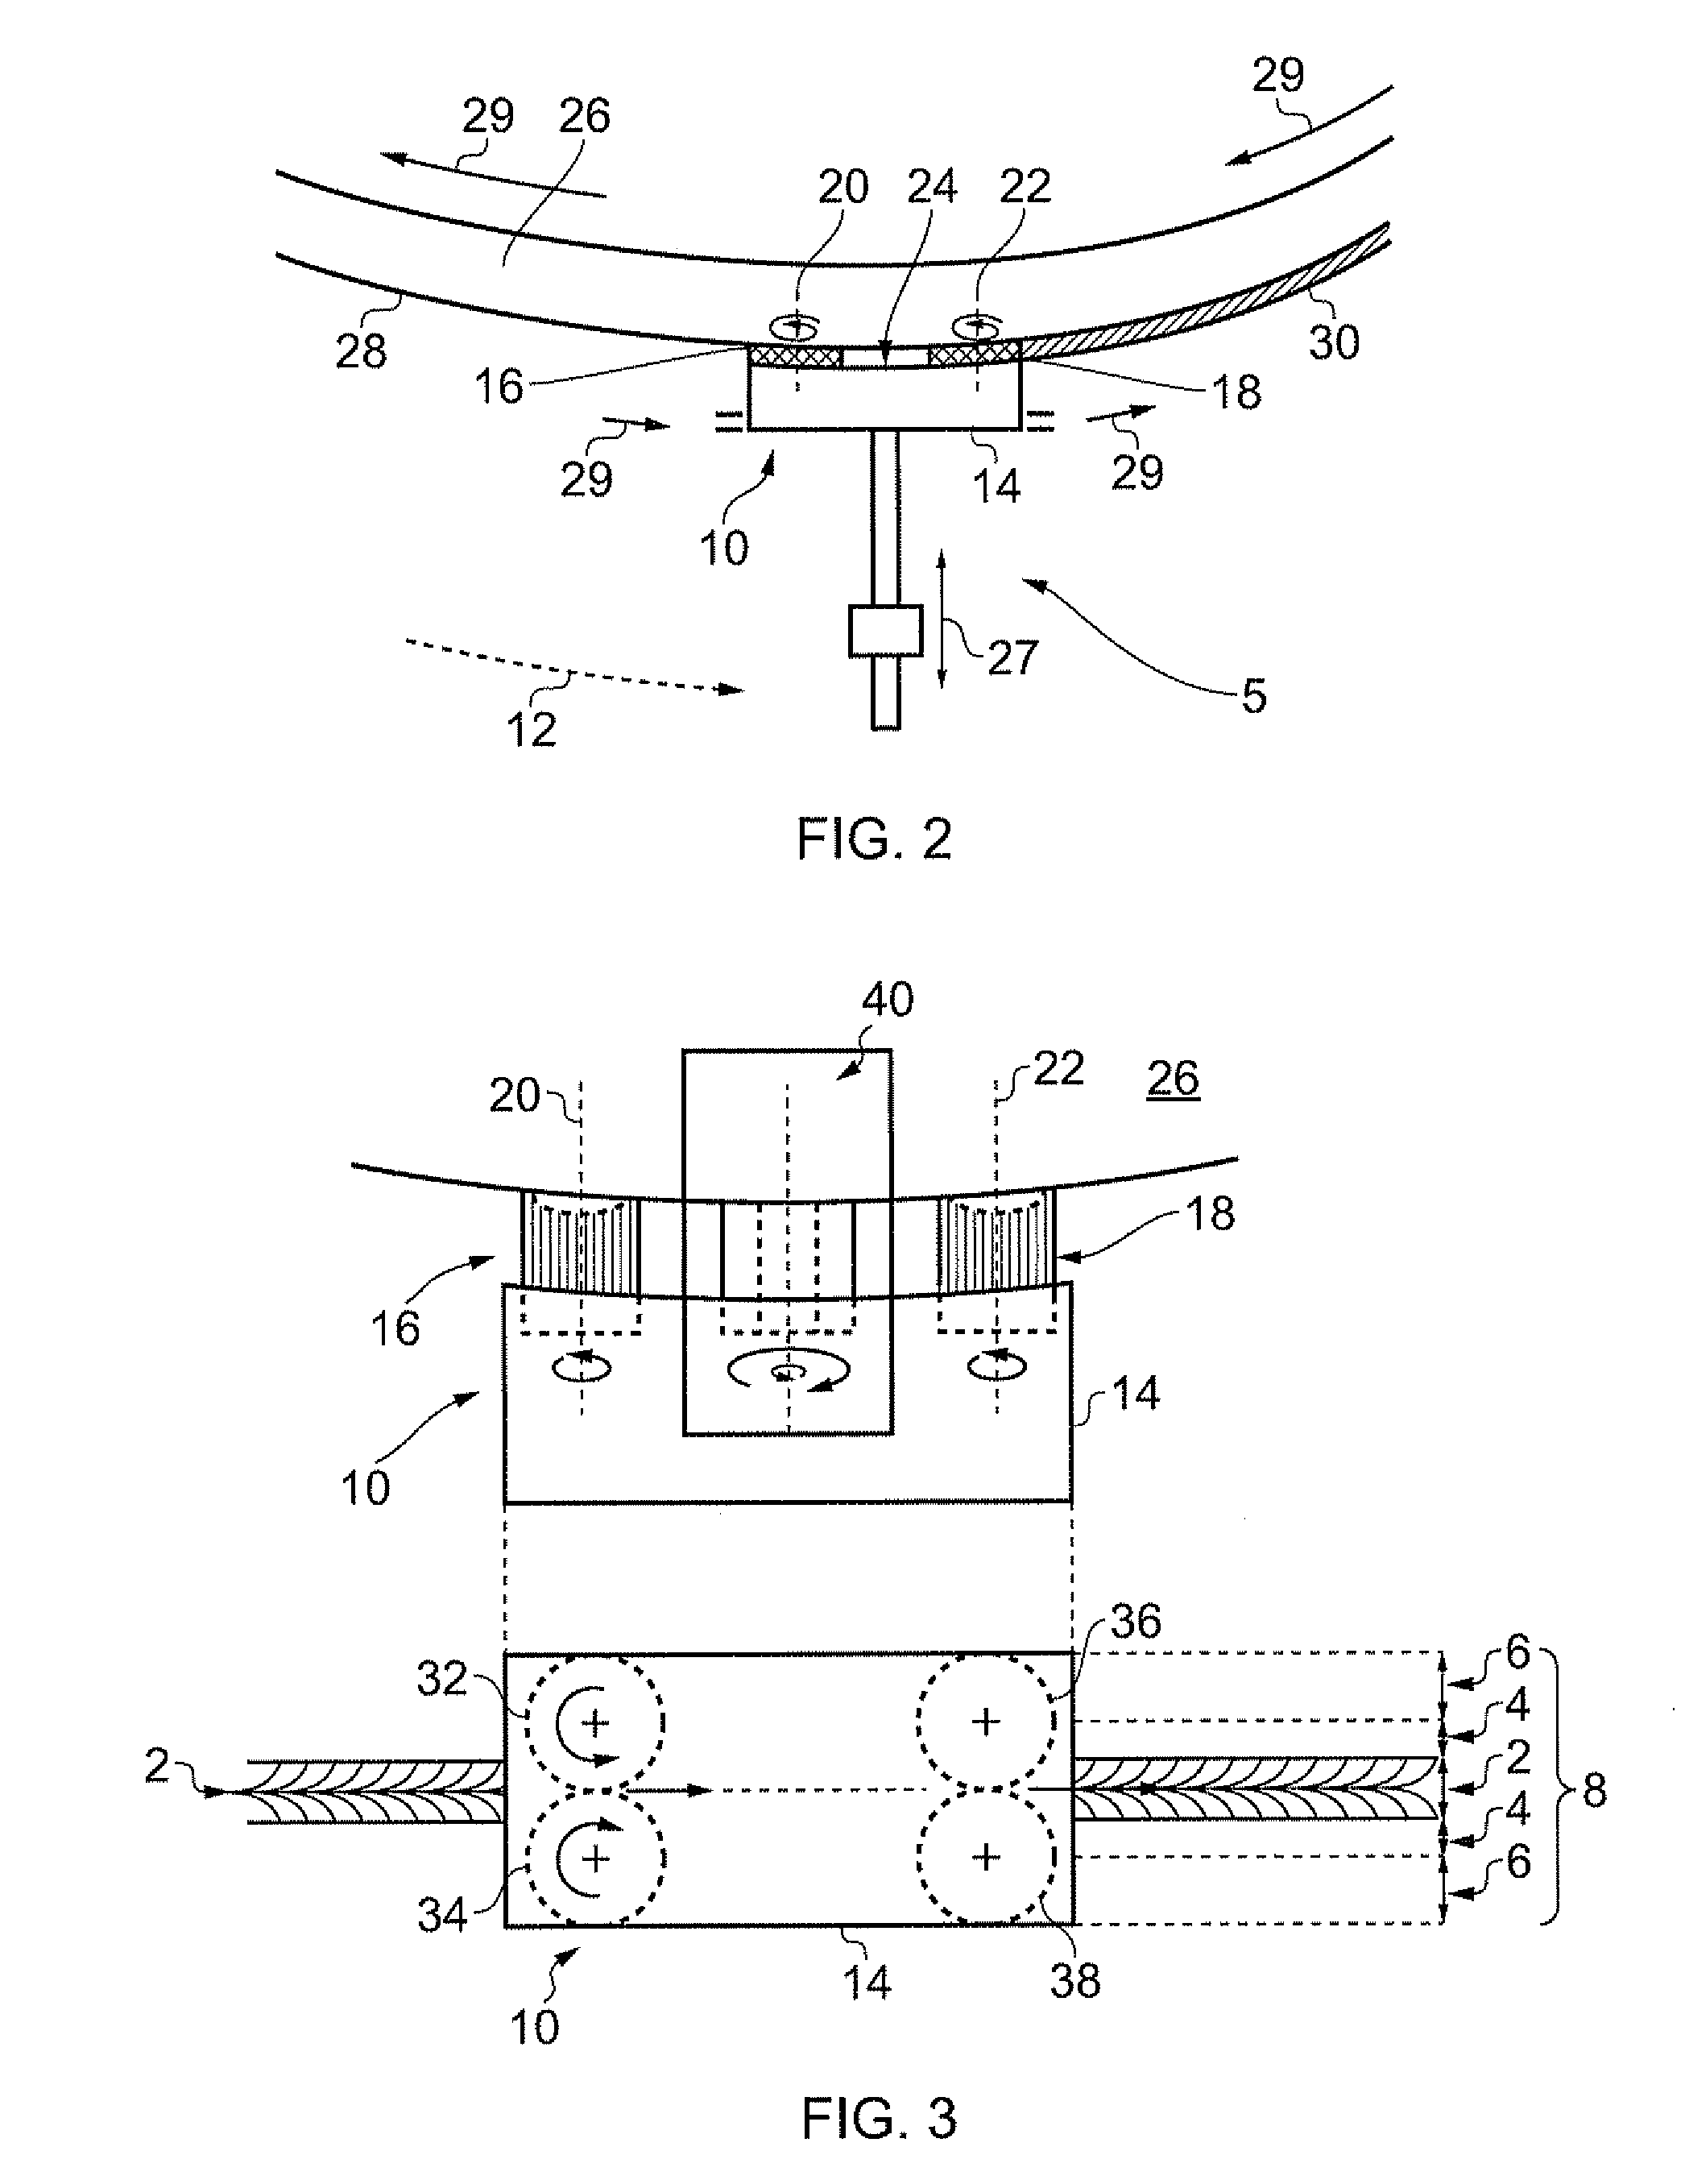 Apparatus and method for applying a fluid to a component